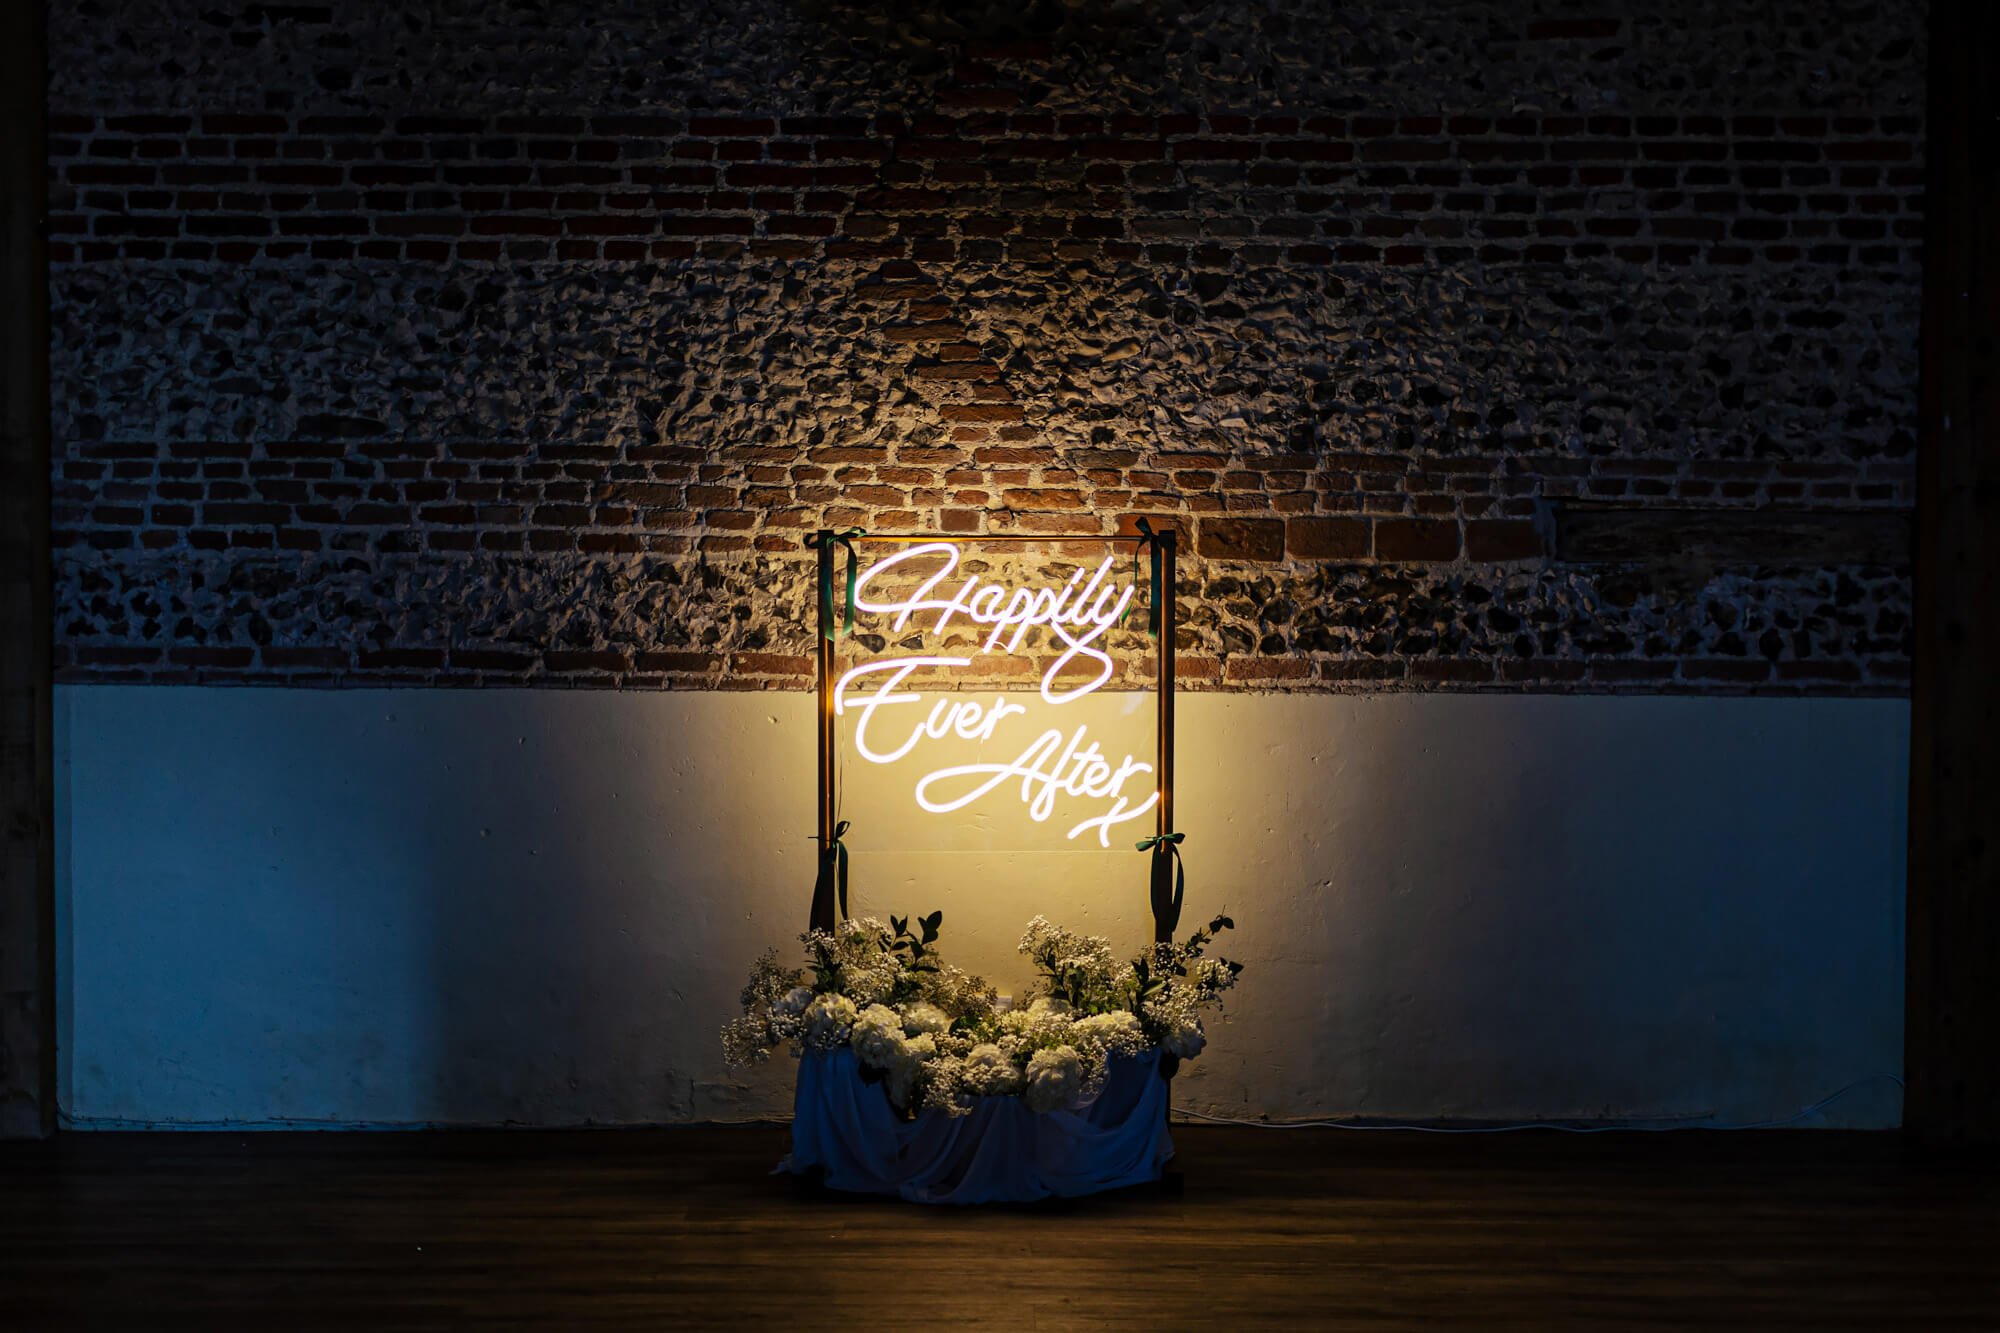 Happily Ever After neon sign at a wedding